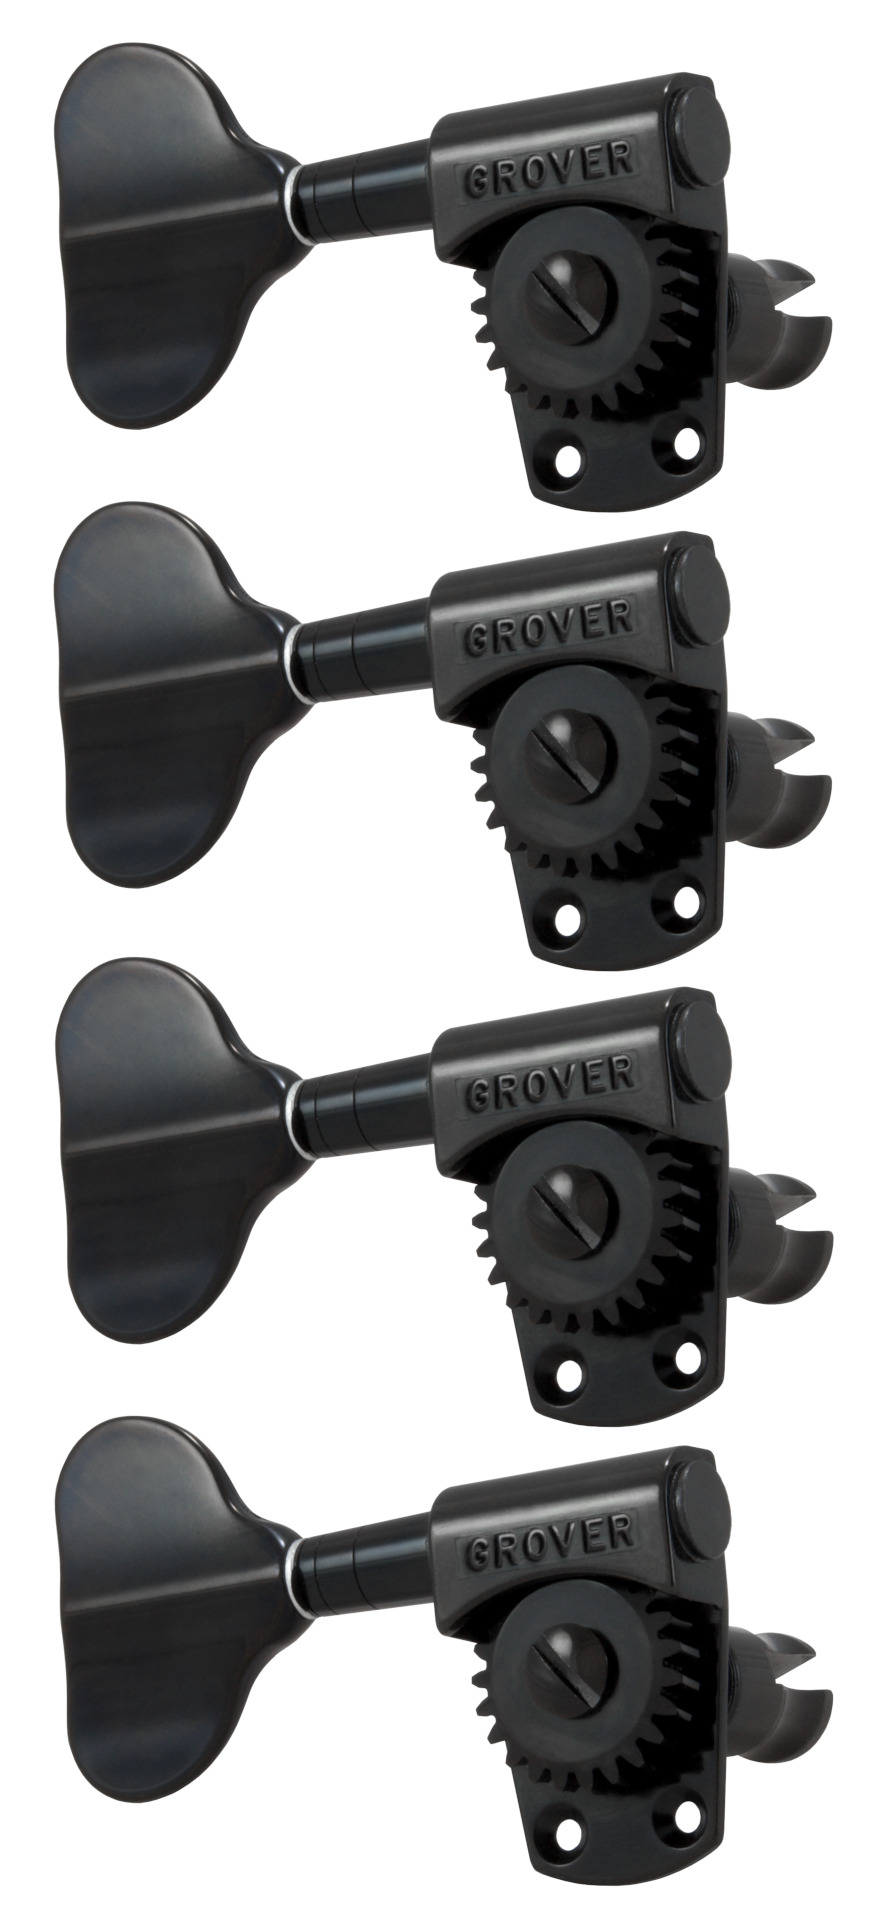 Grover 145BCL4 Titan Electric Bass Machines - Bass Machine Heads, 4-in-Line, Lefthand, Treble Side (Right) - Black Chrome